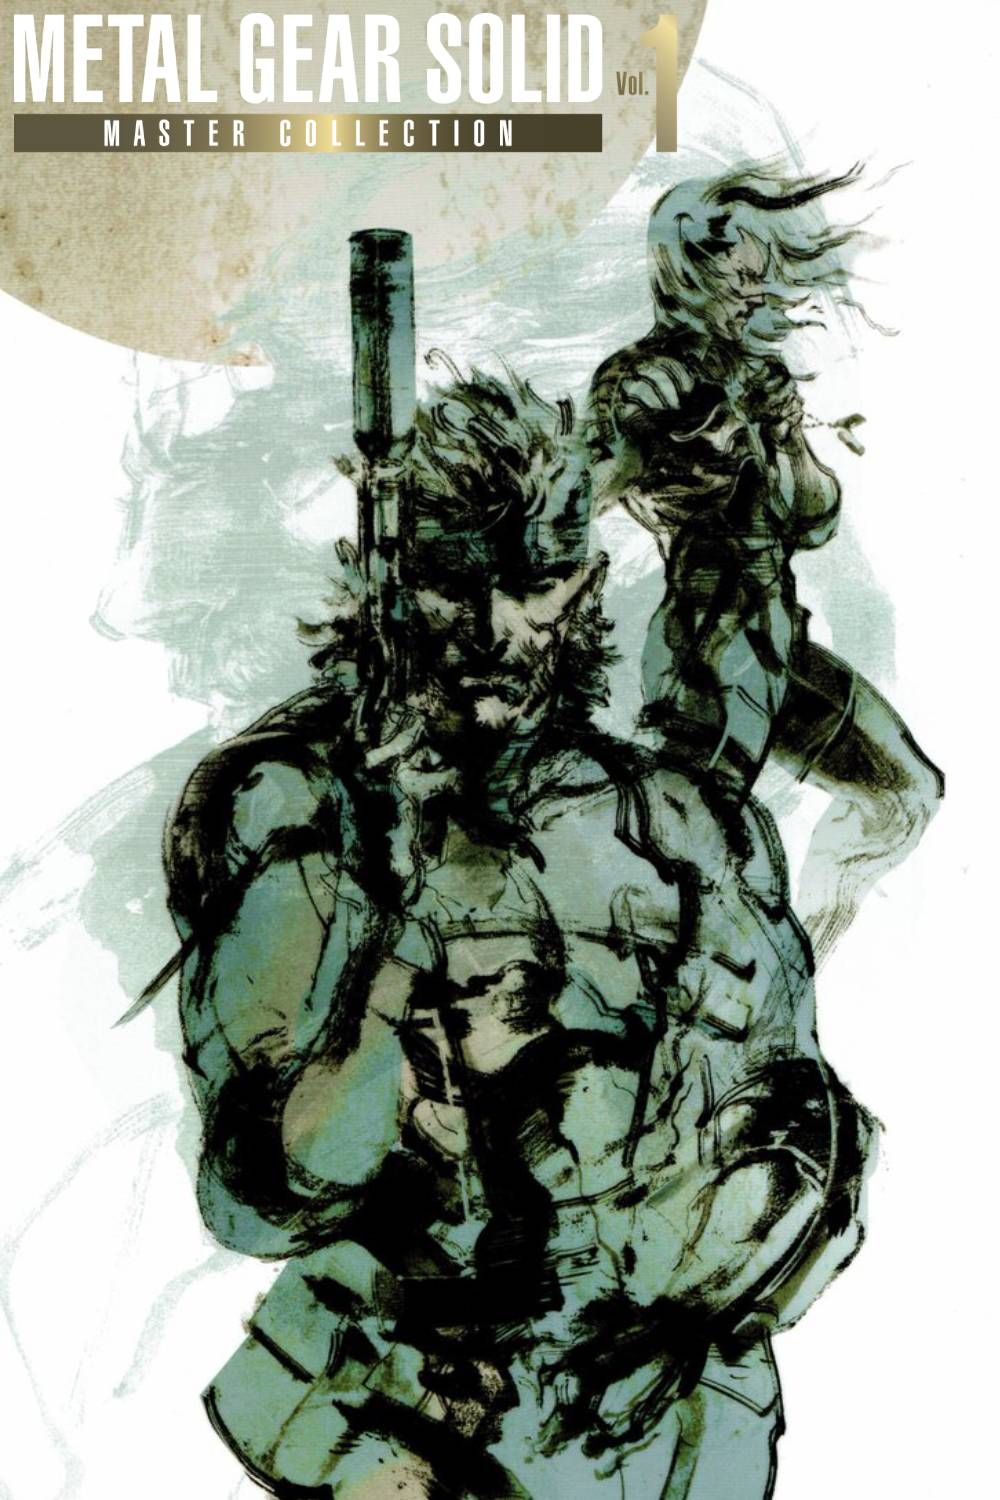 Metal Gear Solid: Master Collection Vol. 1 On PS5